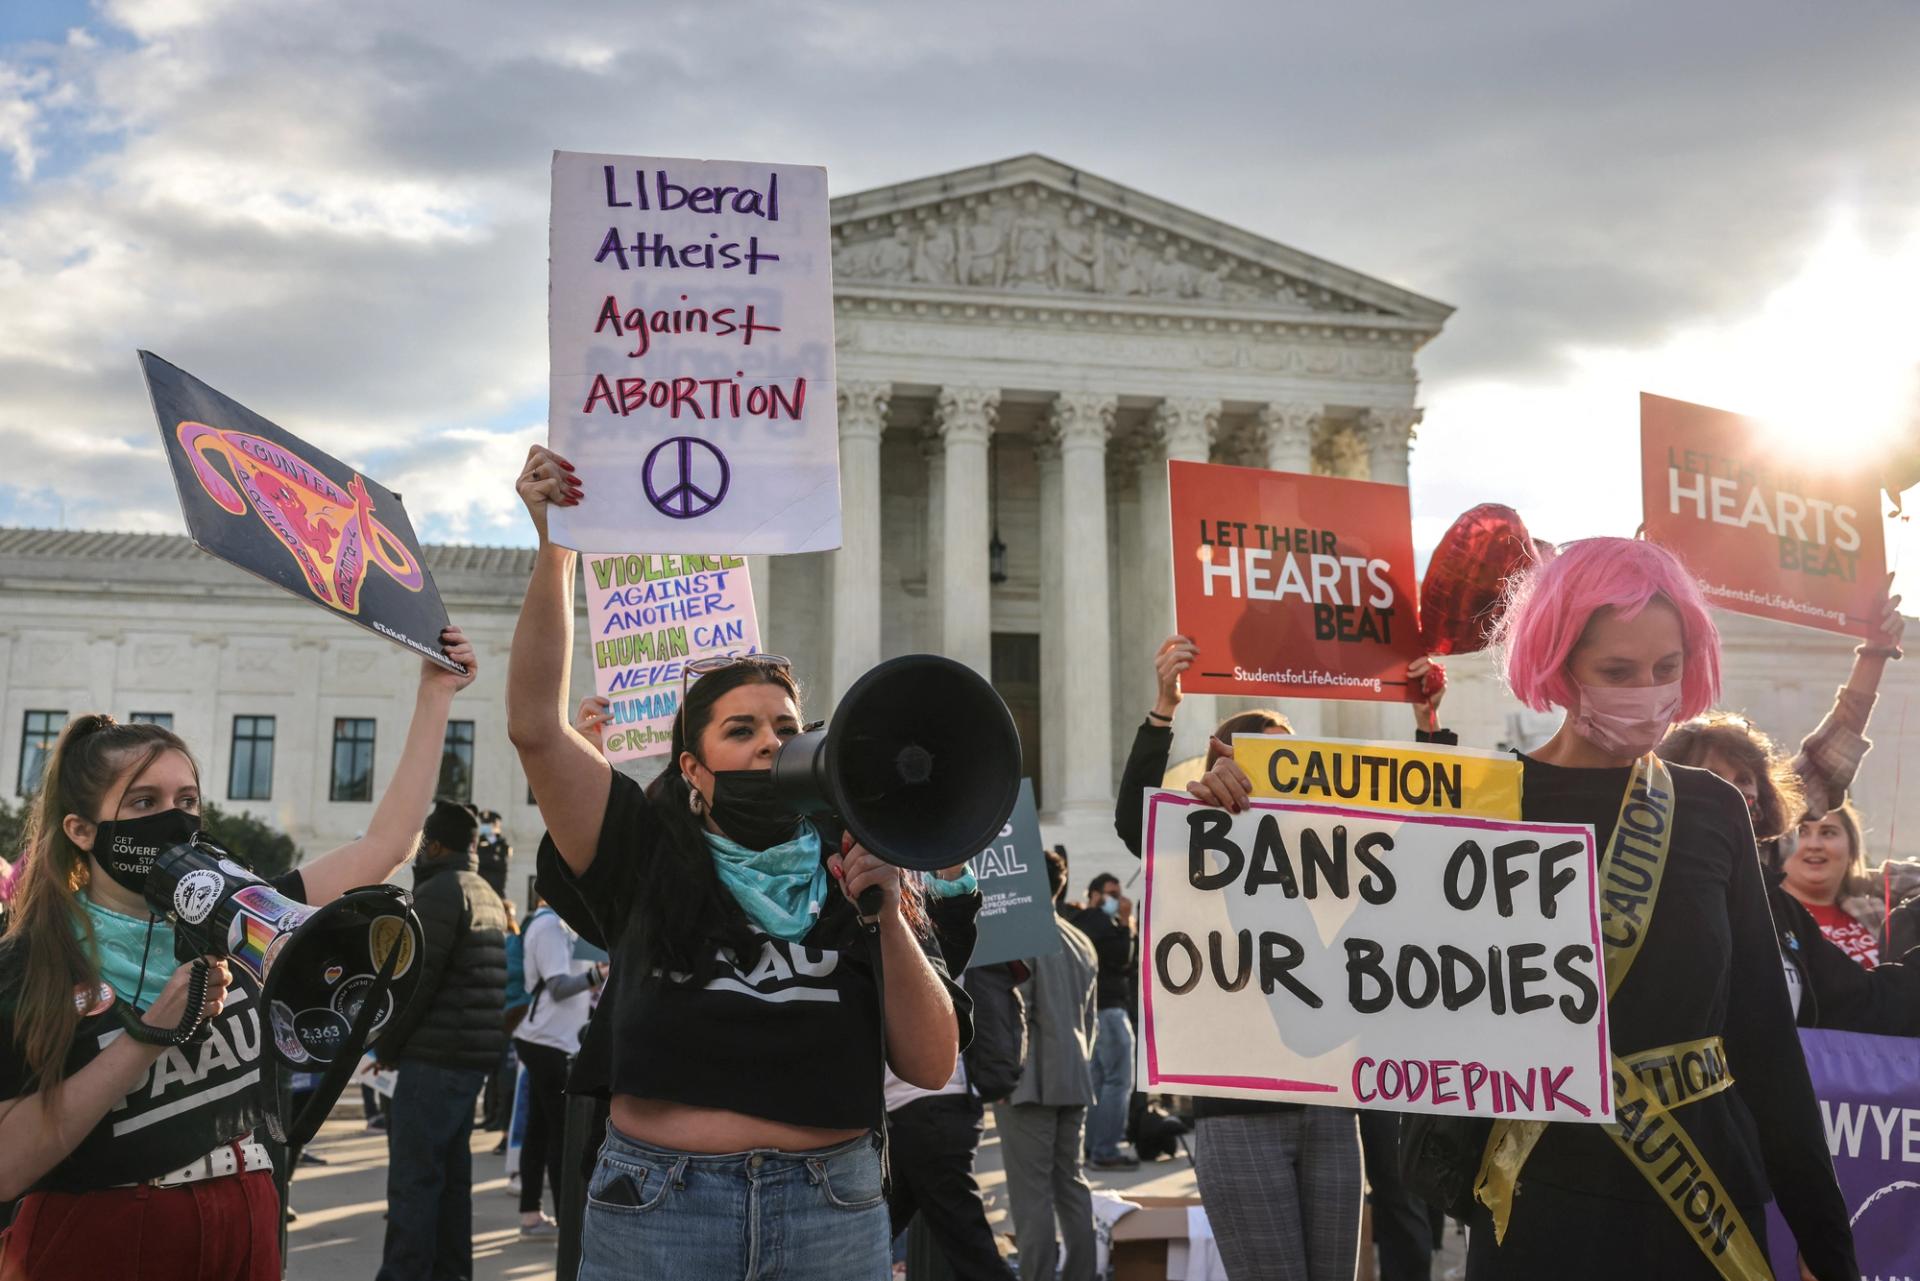 Pro-choice and anti-abortion both demonstrate outside the United States Supreme Court as the court hears arguments over a challenge to a Texas law that bans abortion after six weeks in Washington, D.C., on Nov. 1, 2021